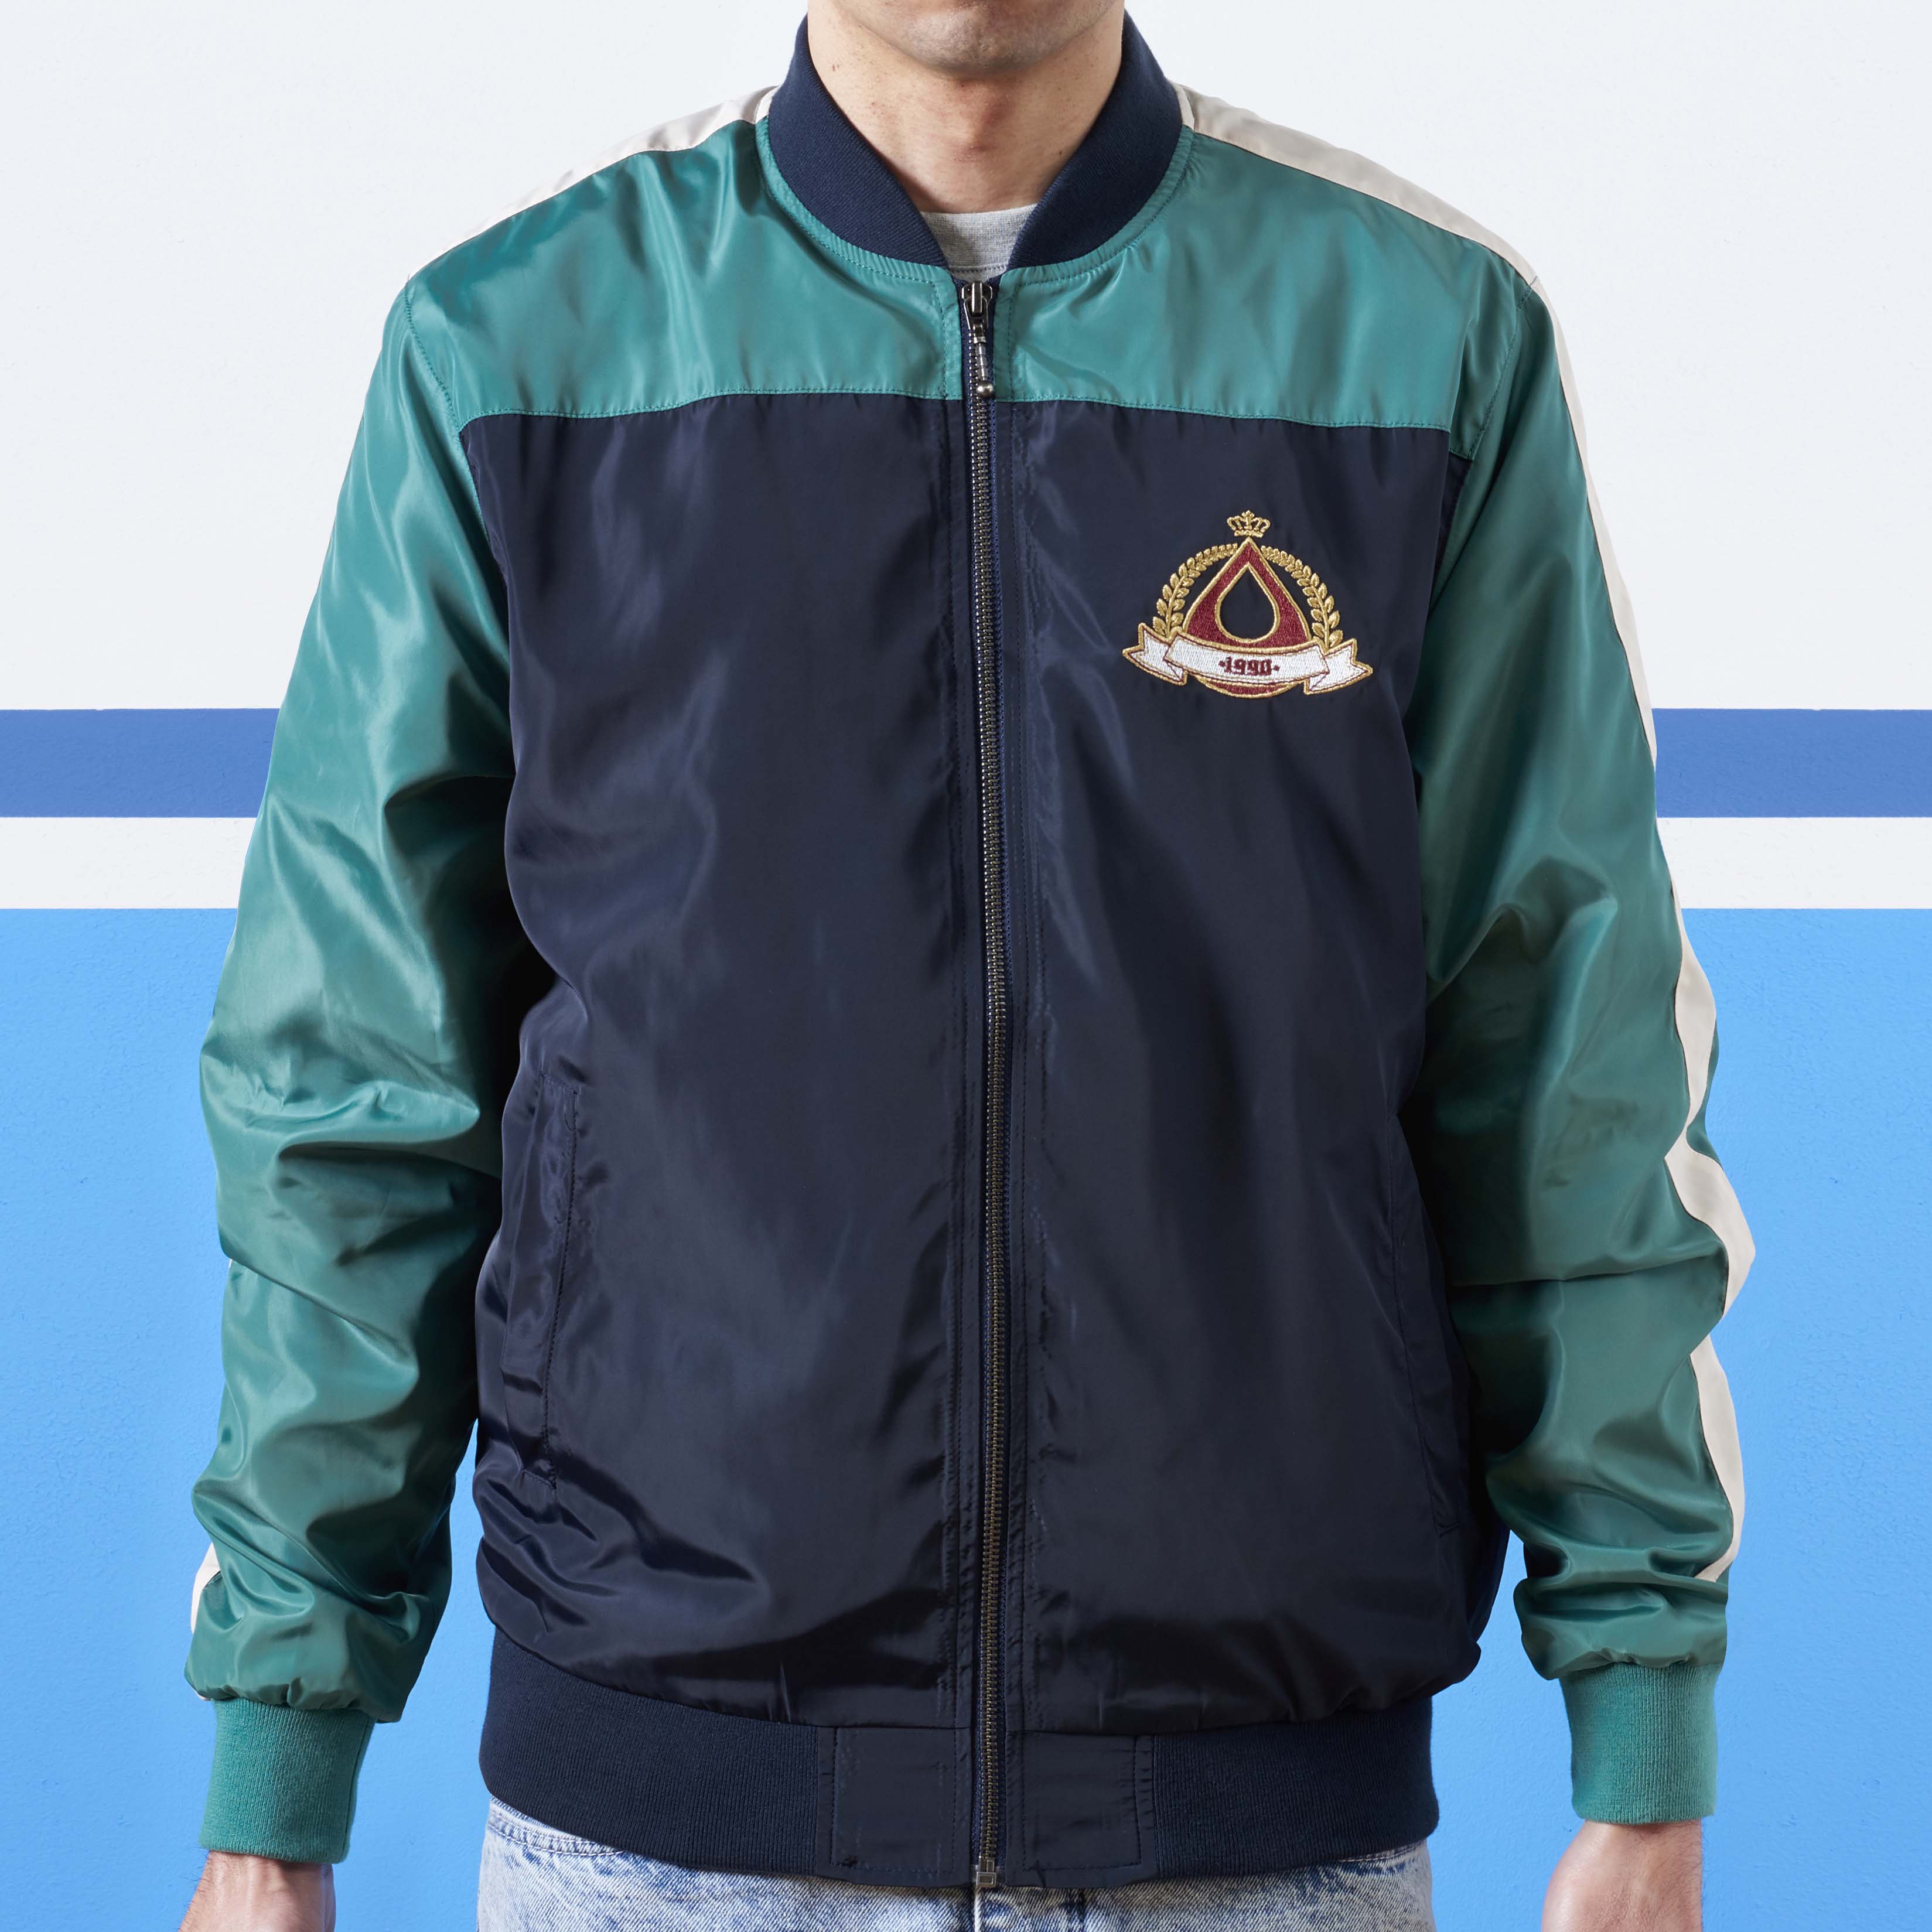 navy and green track jacket with crest embroidery